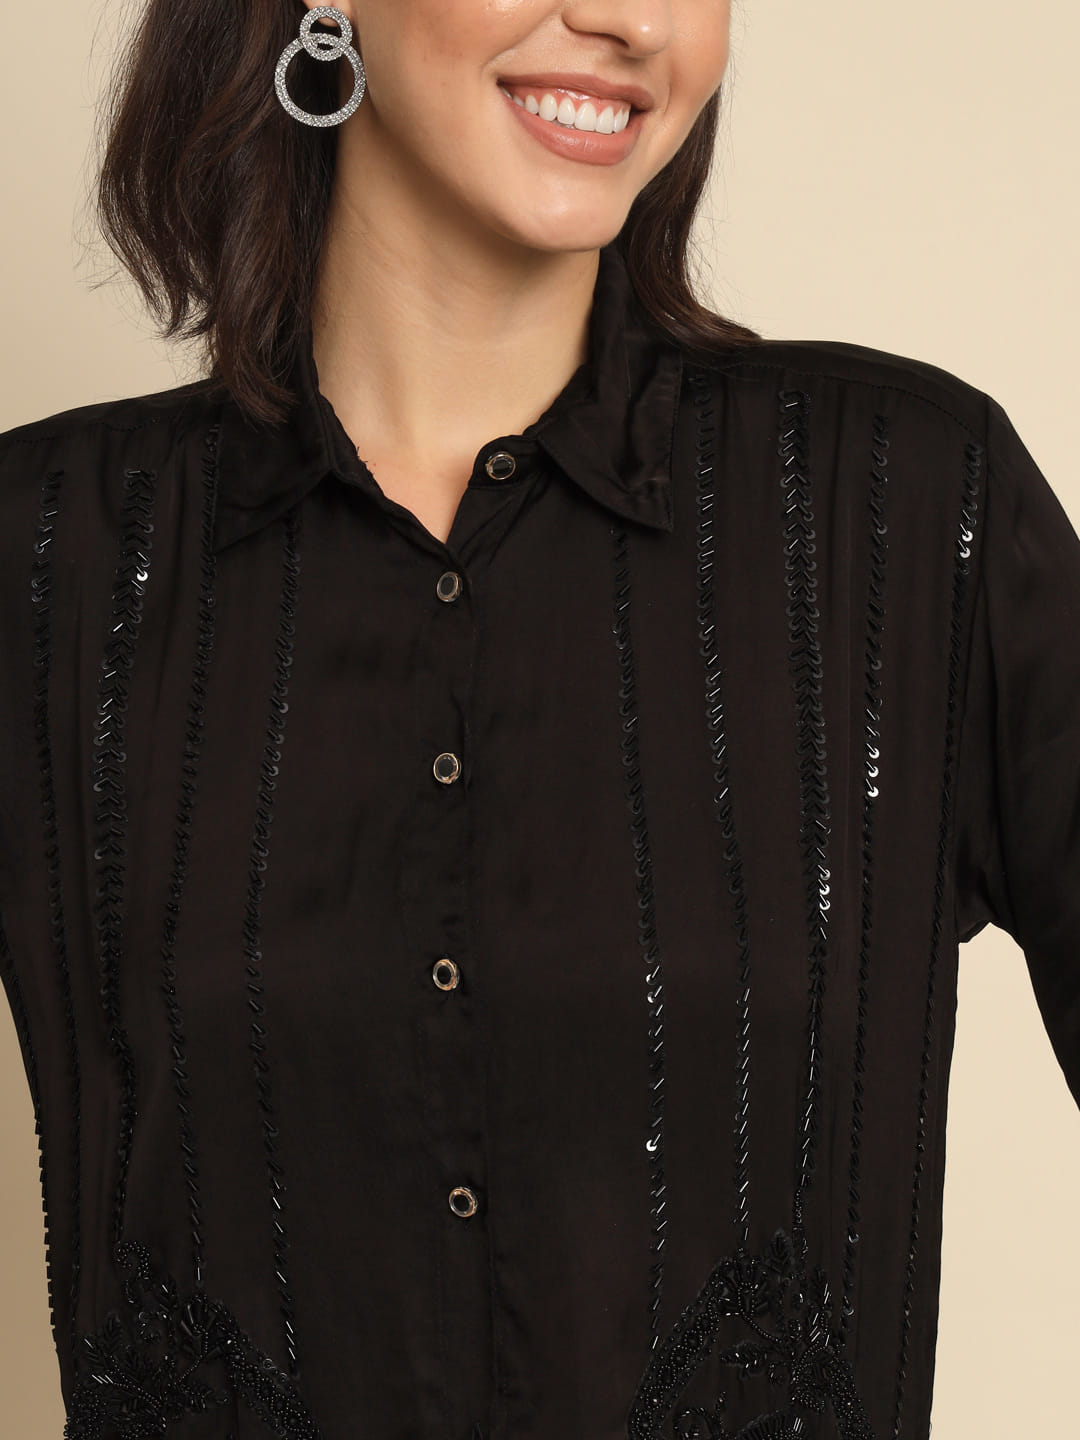 Celestial Intricacies: A Hand Embroidered Black Shirt